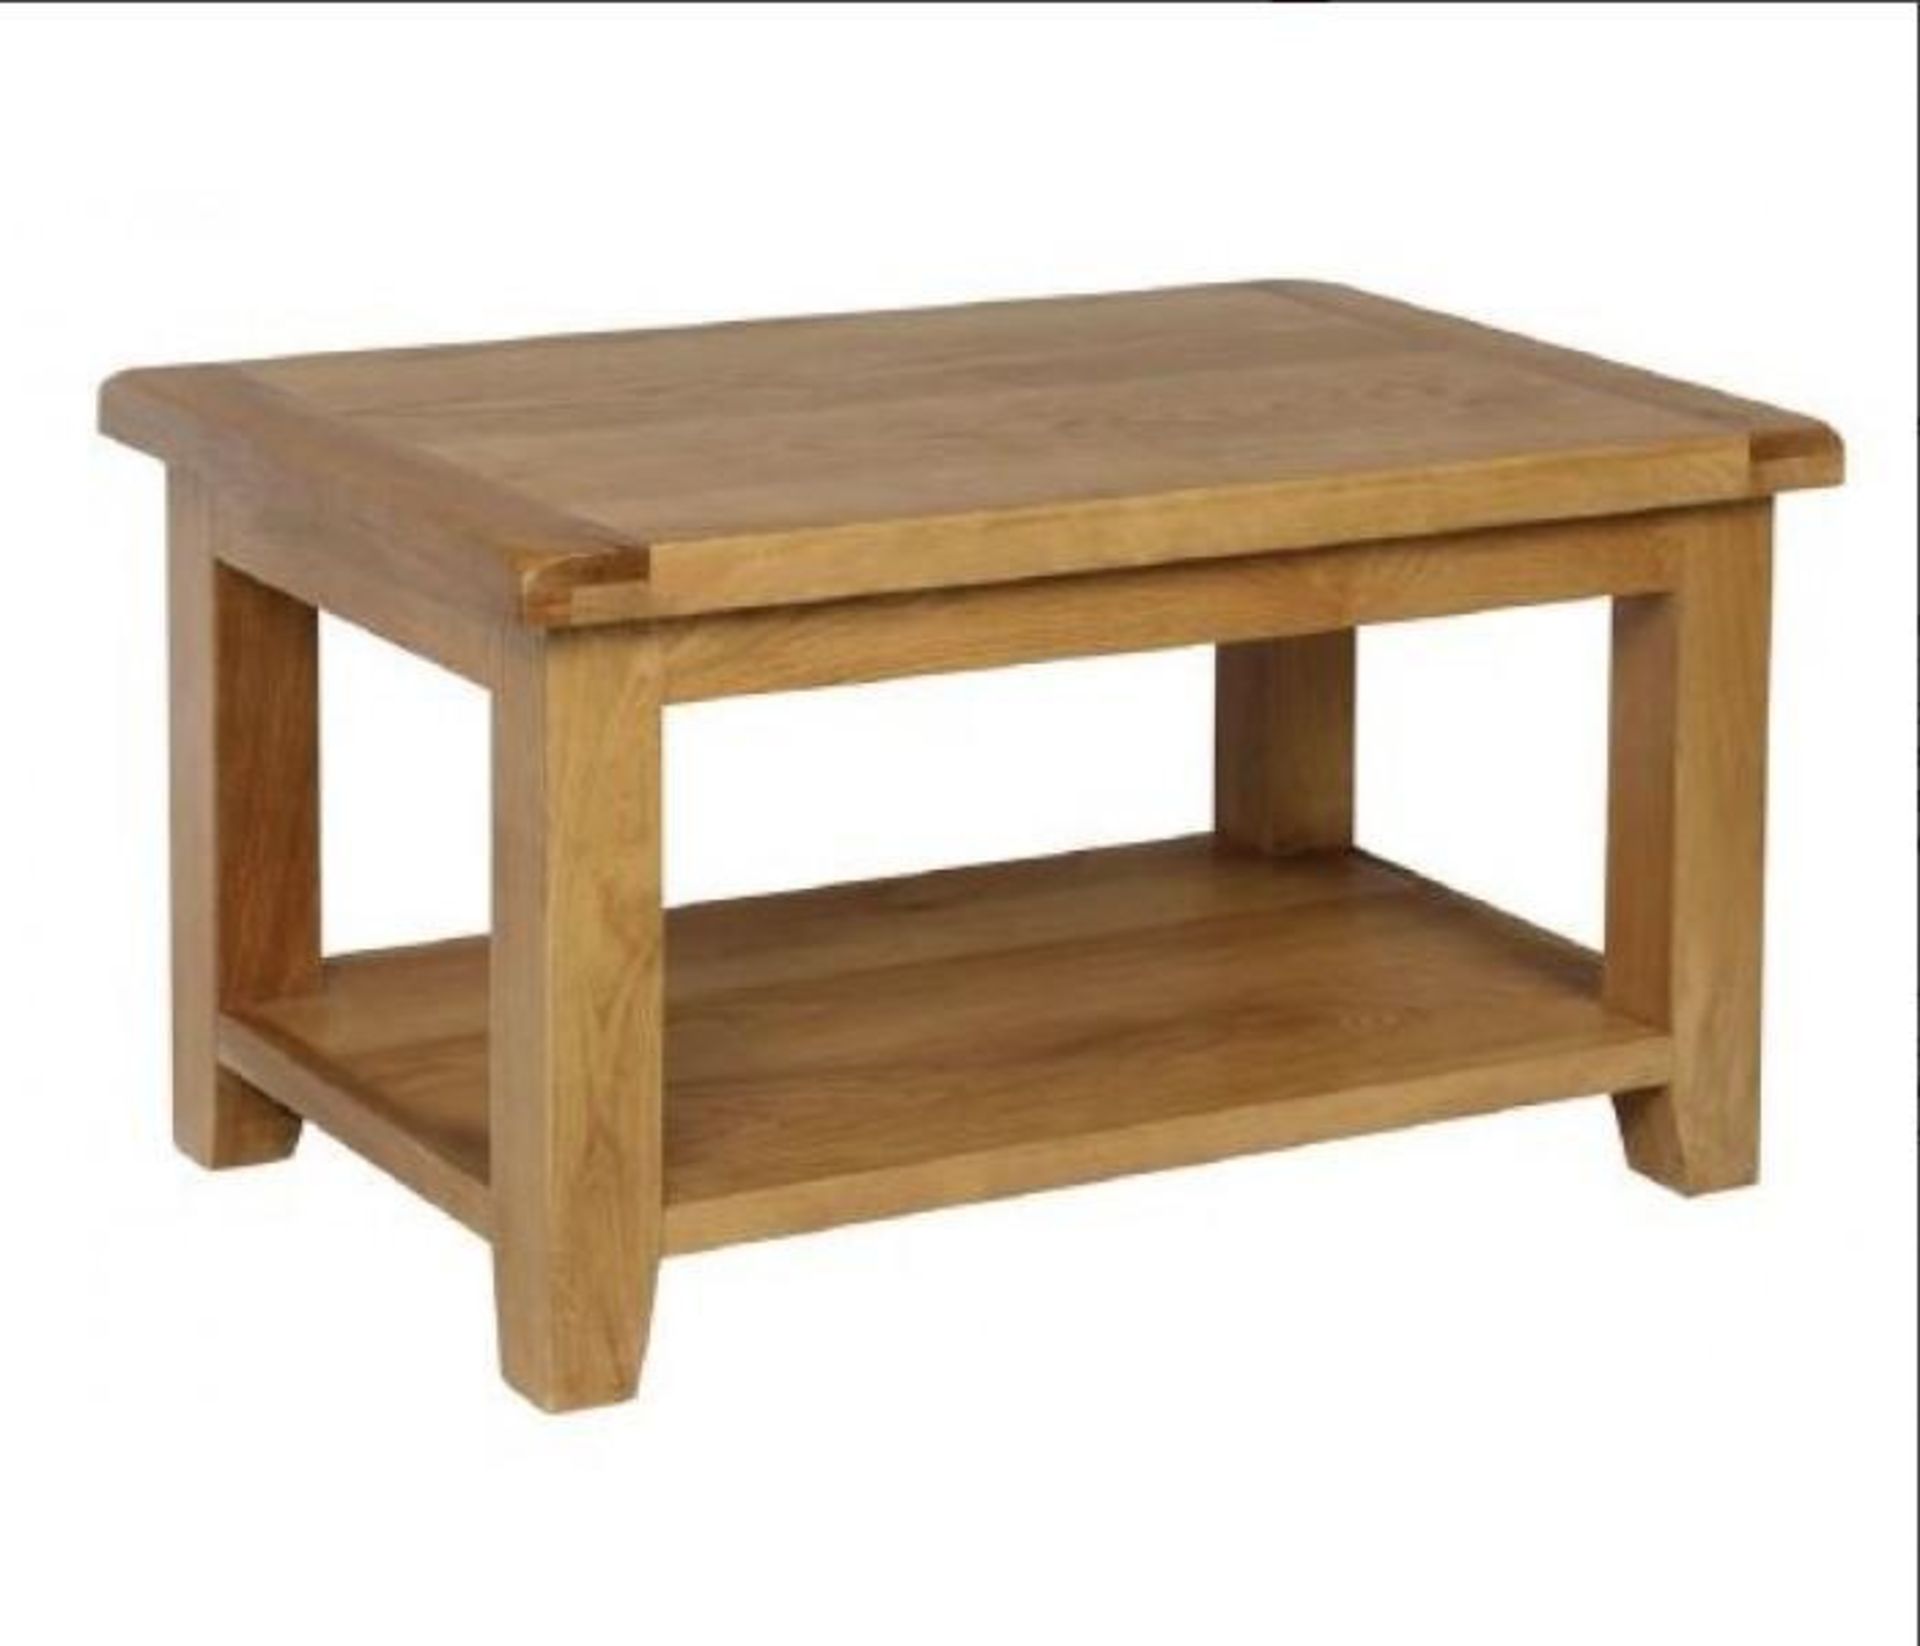 BRAND NEW & BOXED Trewick small coffee table